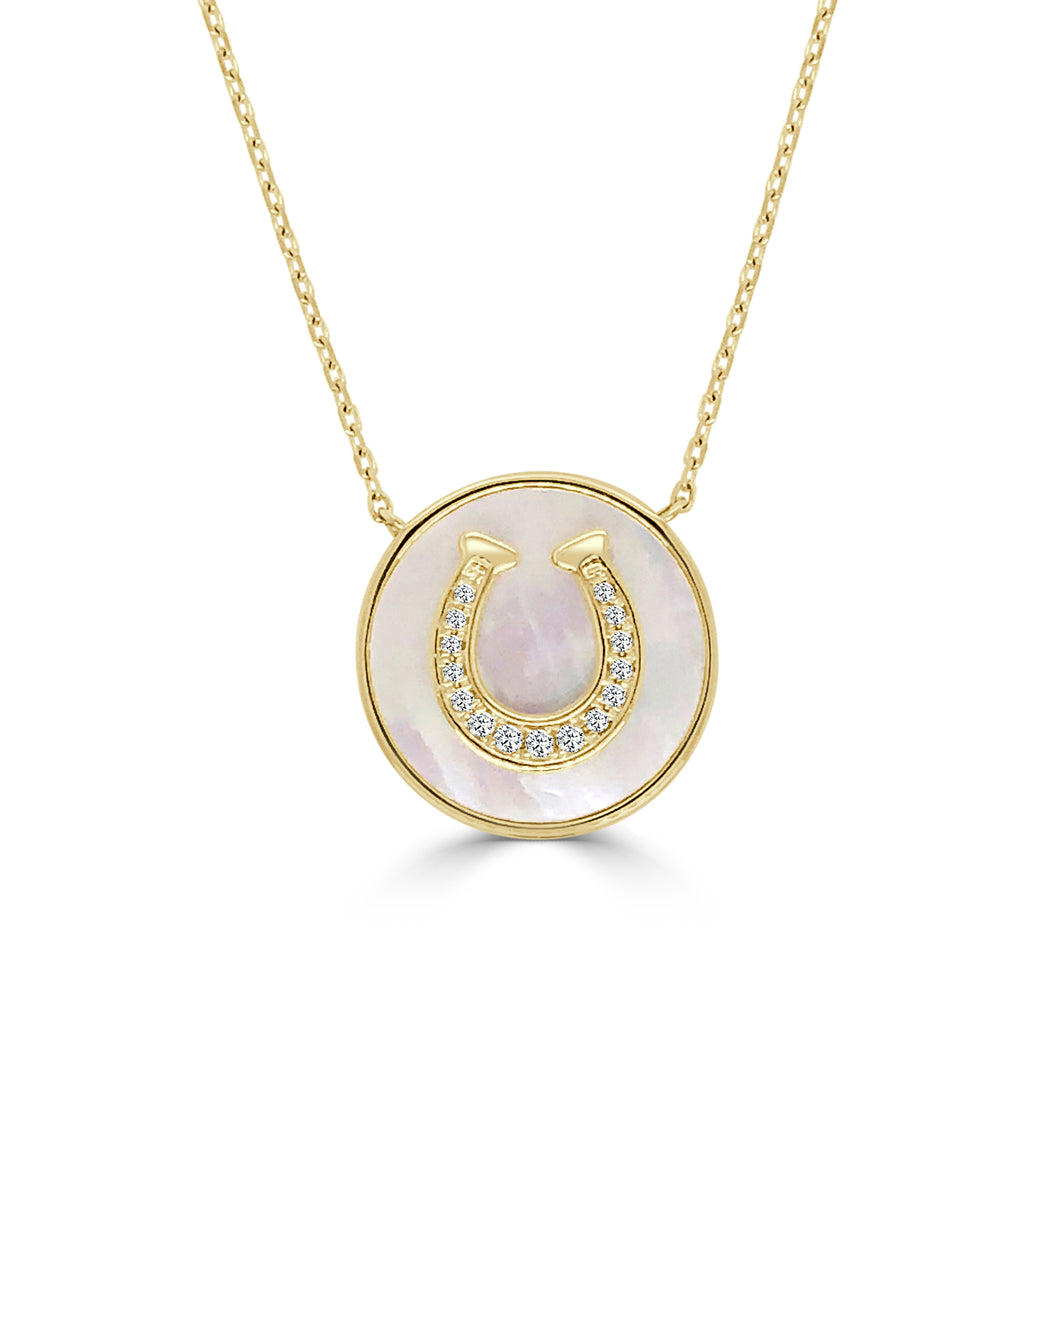 Horse Shoe Necklace w/ Diamonds and Mother of Pearl - Yellow Gold